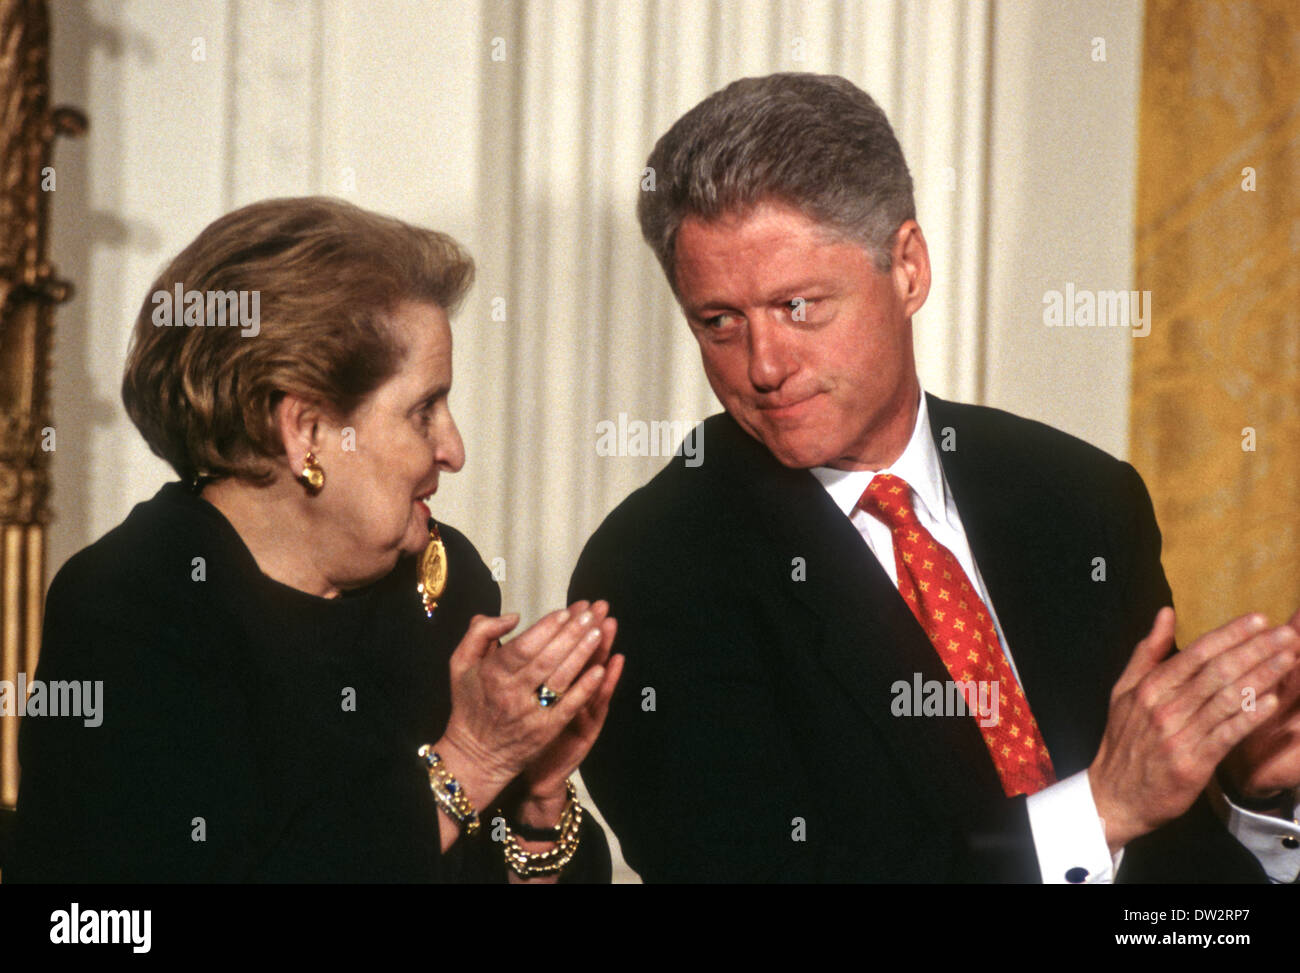 US President Bill Clinton speaks with Secretary of State Madeline Albright during a event at the White House March 11, 1998 in Washington, DC. Stock Photo